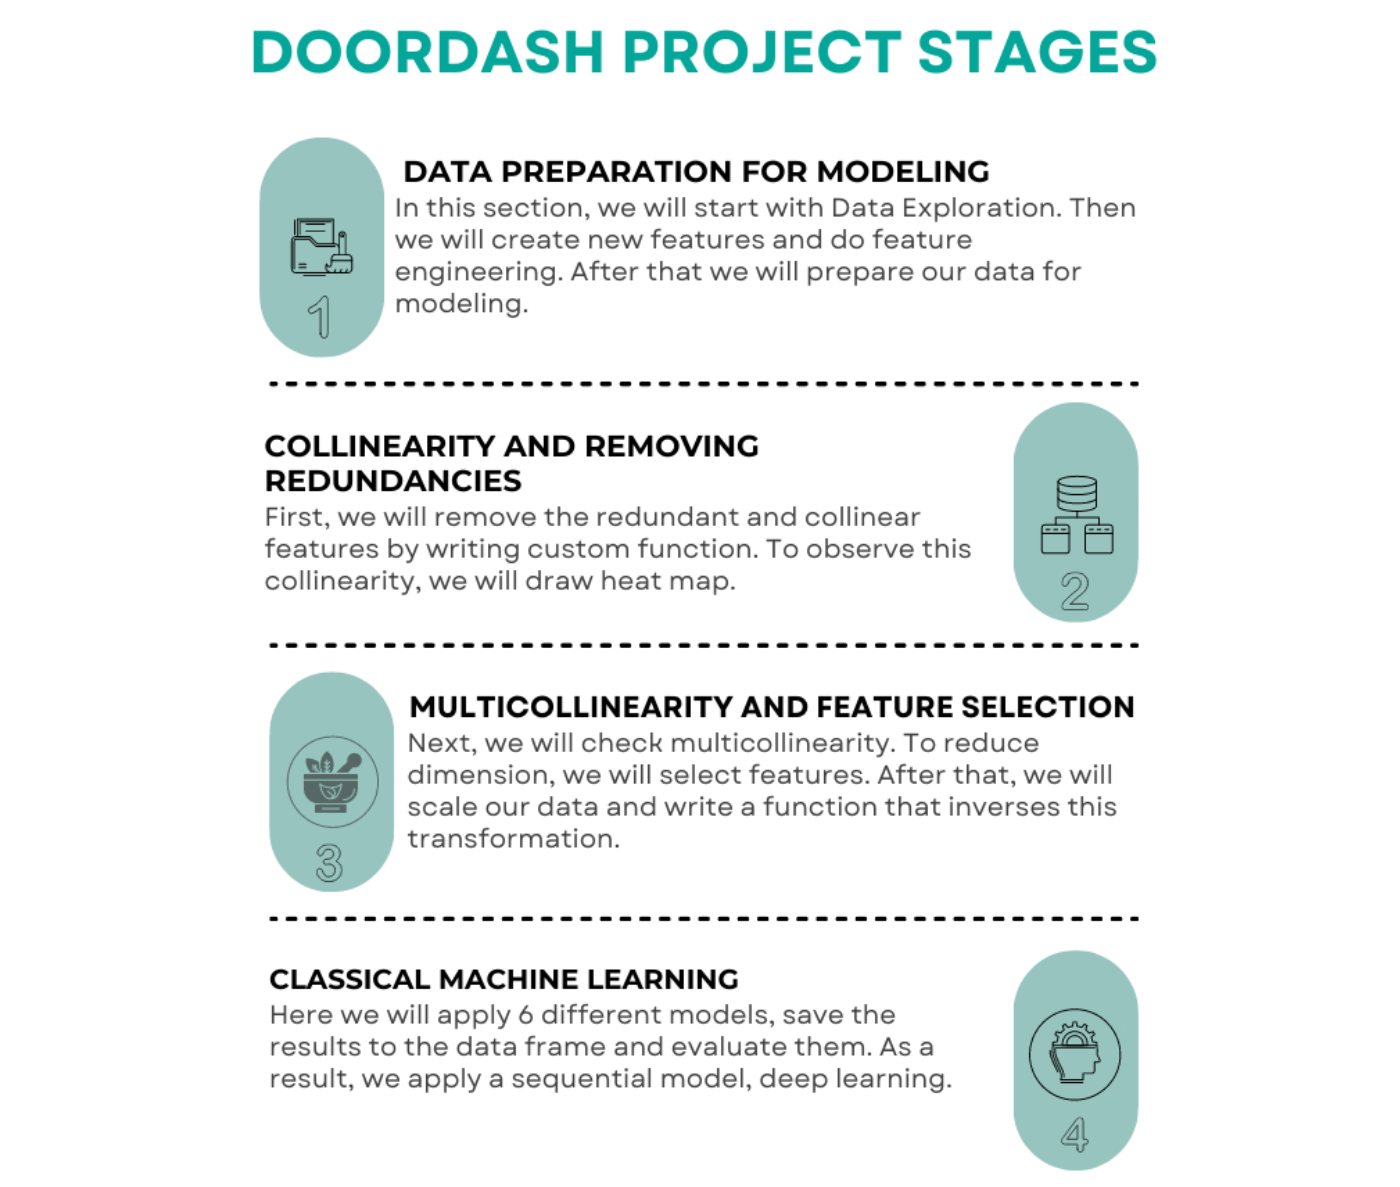 DoorDash data project stages